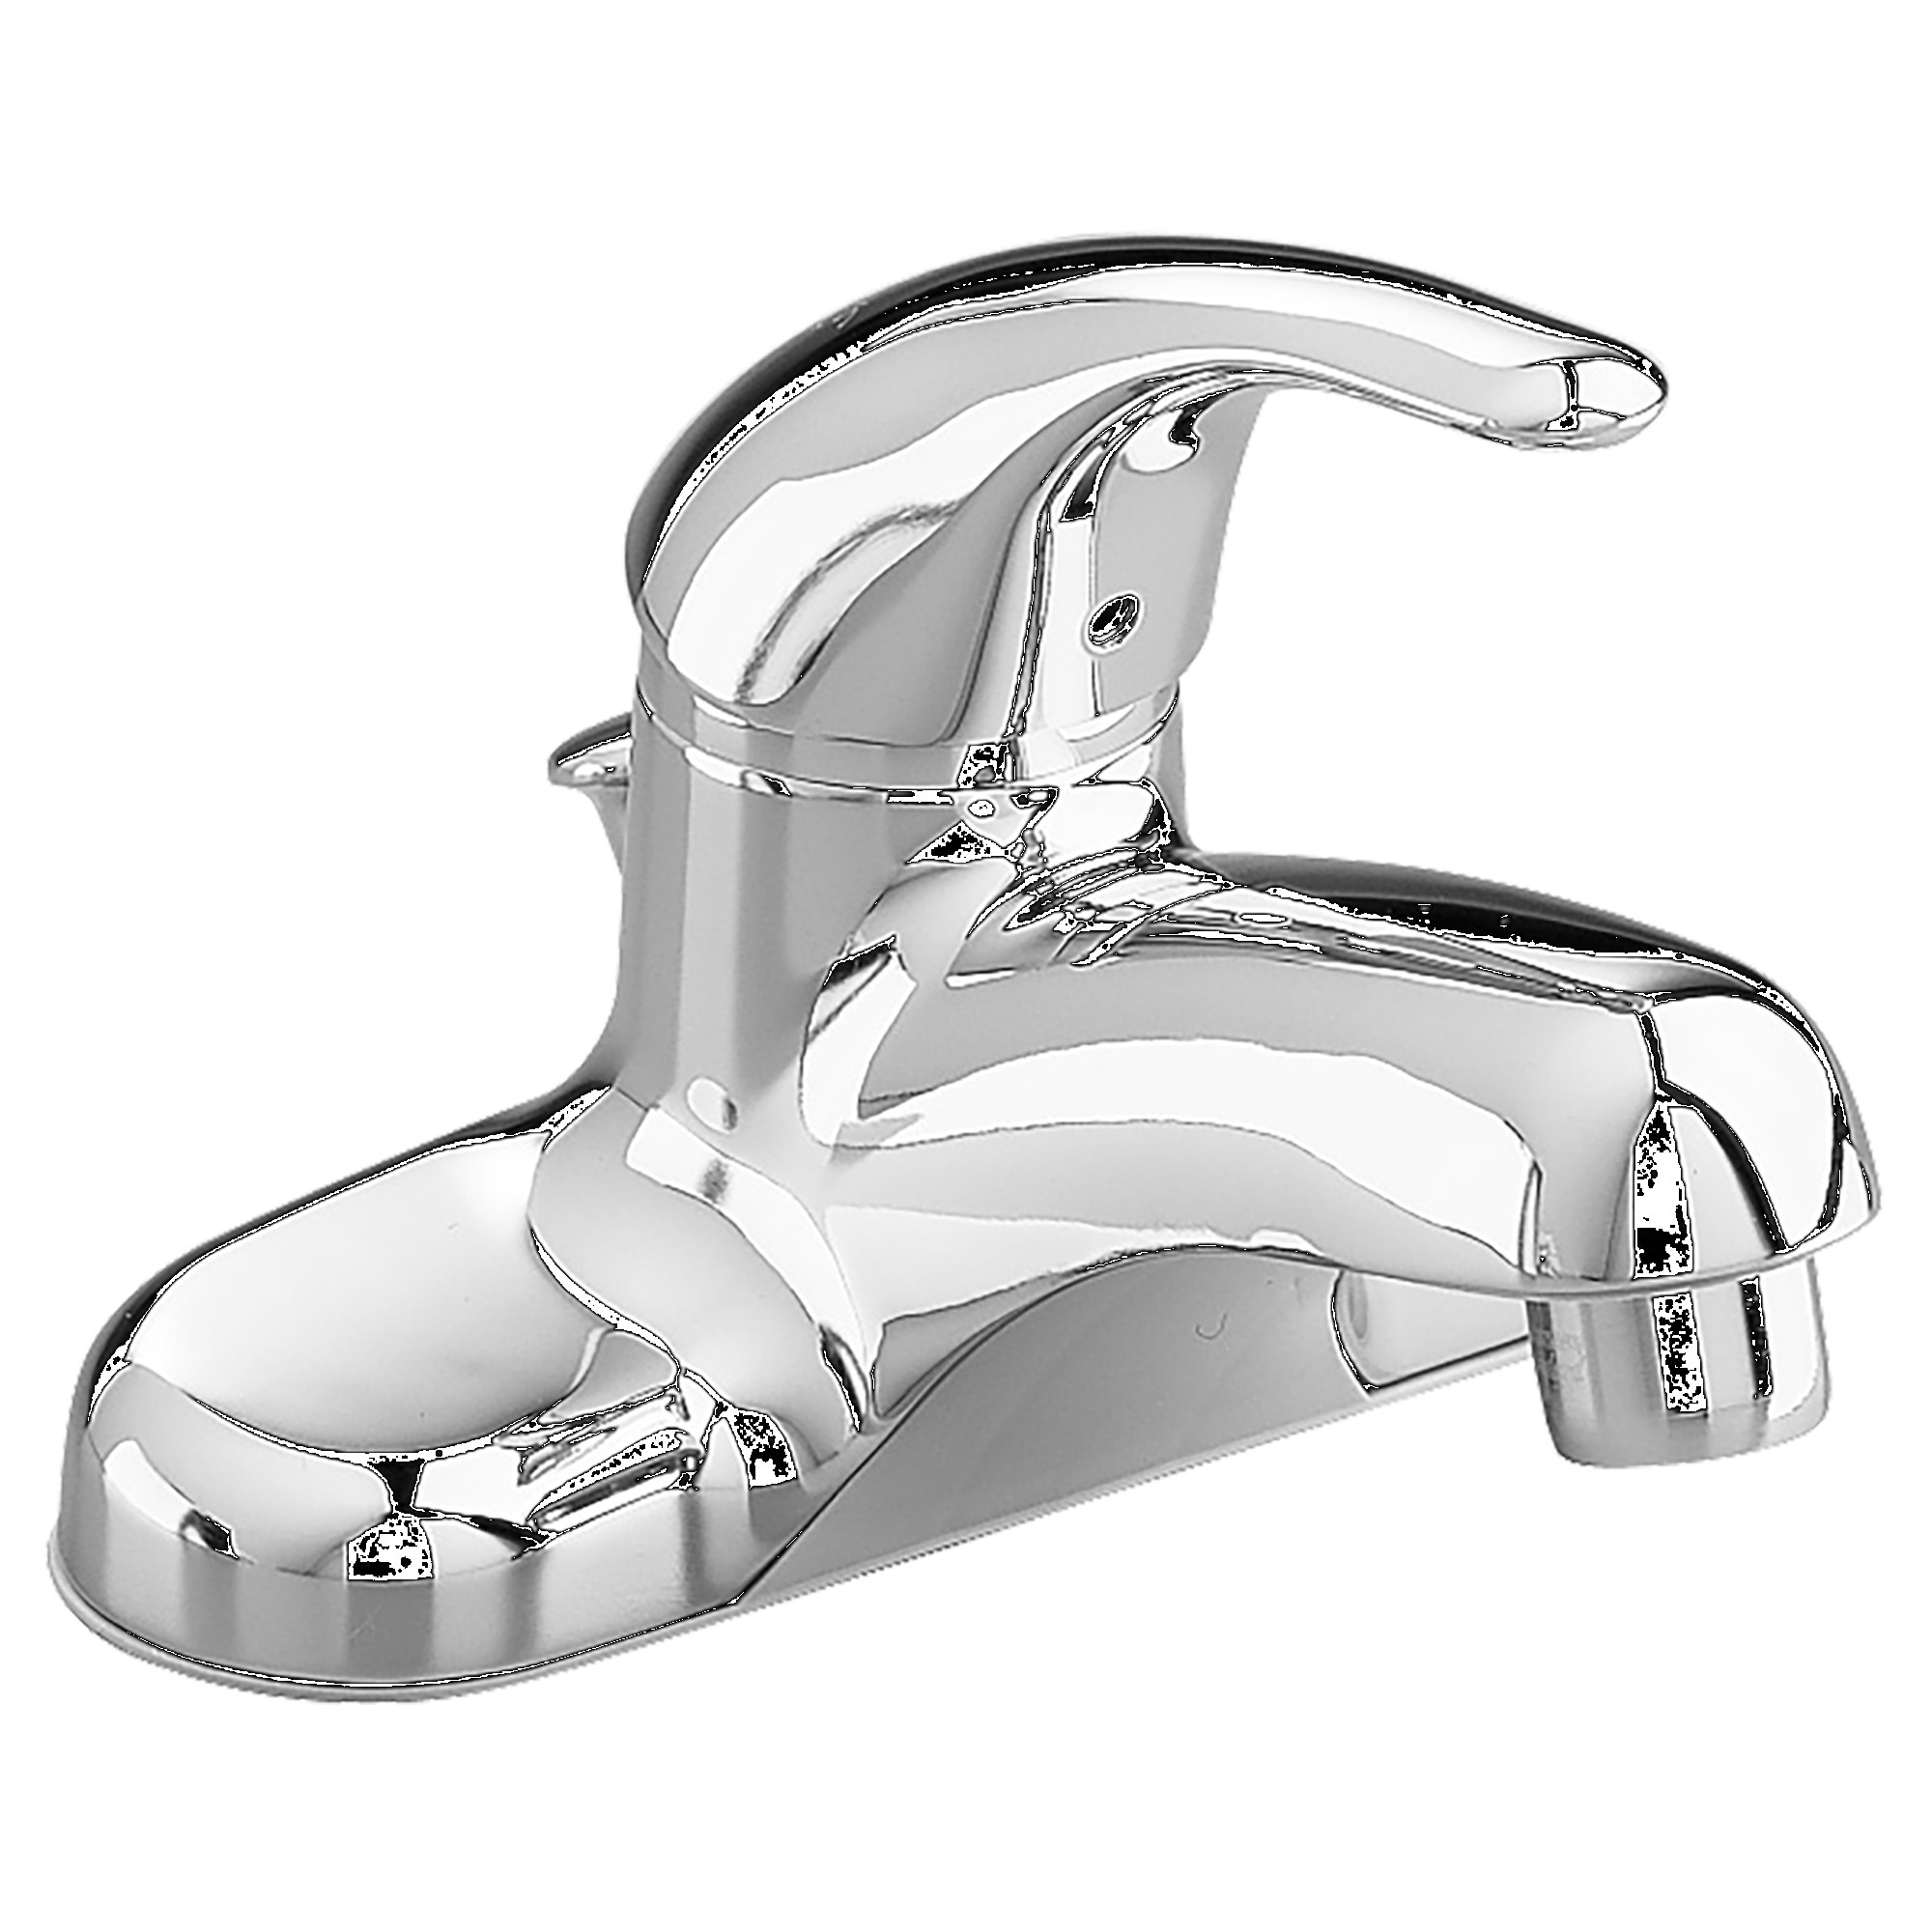 American Standard | 2175.502.002 | AMERICAN STANDARD 2175.502 COLONY 4 SINGLE-LEVER CENTERSET LAVATORY FAUCET WITH POP-UP CP 002 CHROME 1.5GPM